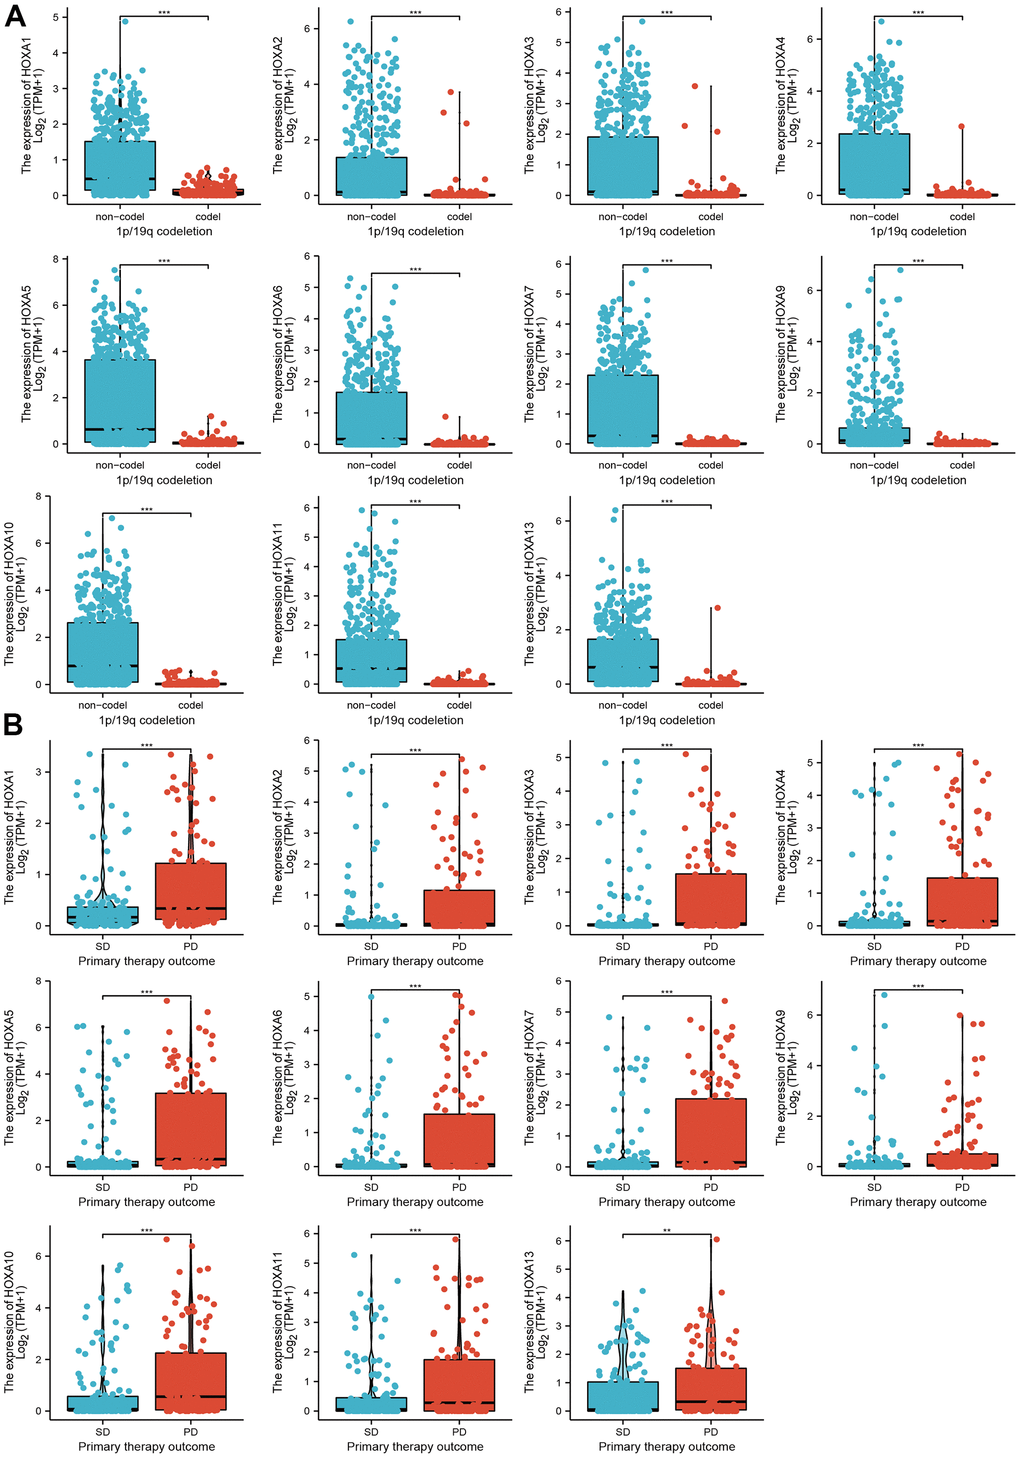 The correlation between HOXAs expression and clinical information in LGG. (A, B) The correlation between HOXAs expression and clinical features, including the 1p/19q codeletion and primary therapy outcome in glioma based on TCGA-LGG. *p 